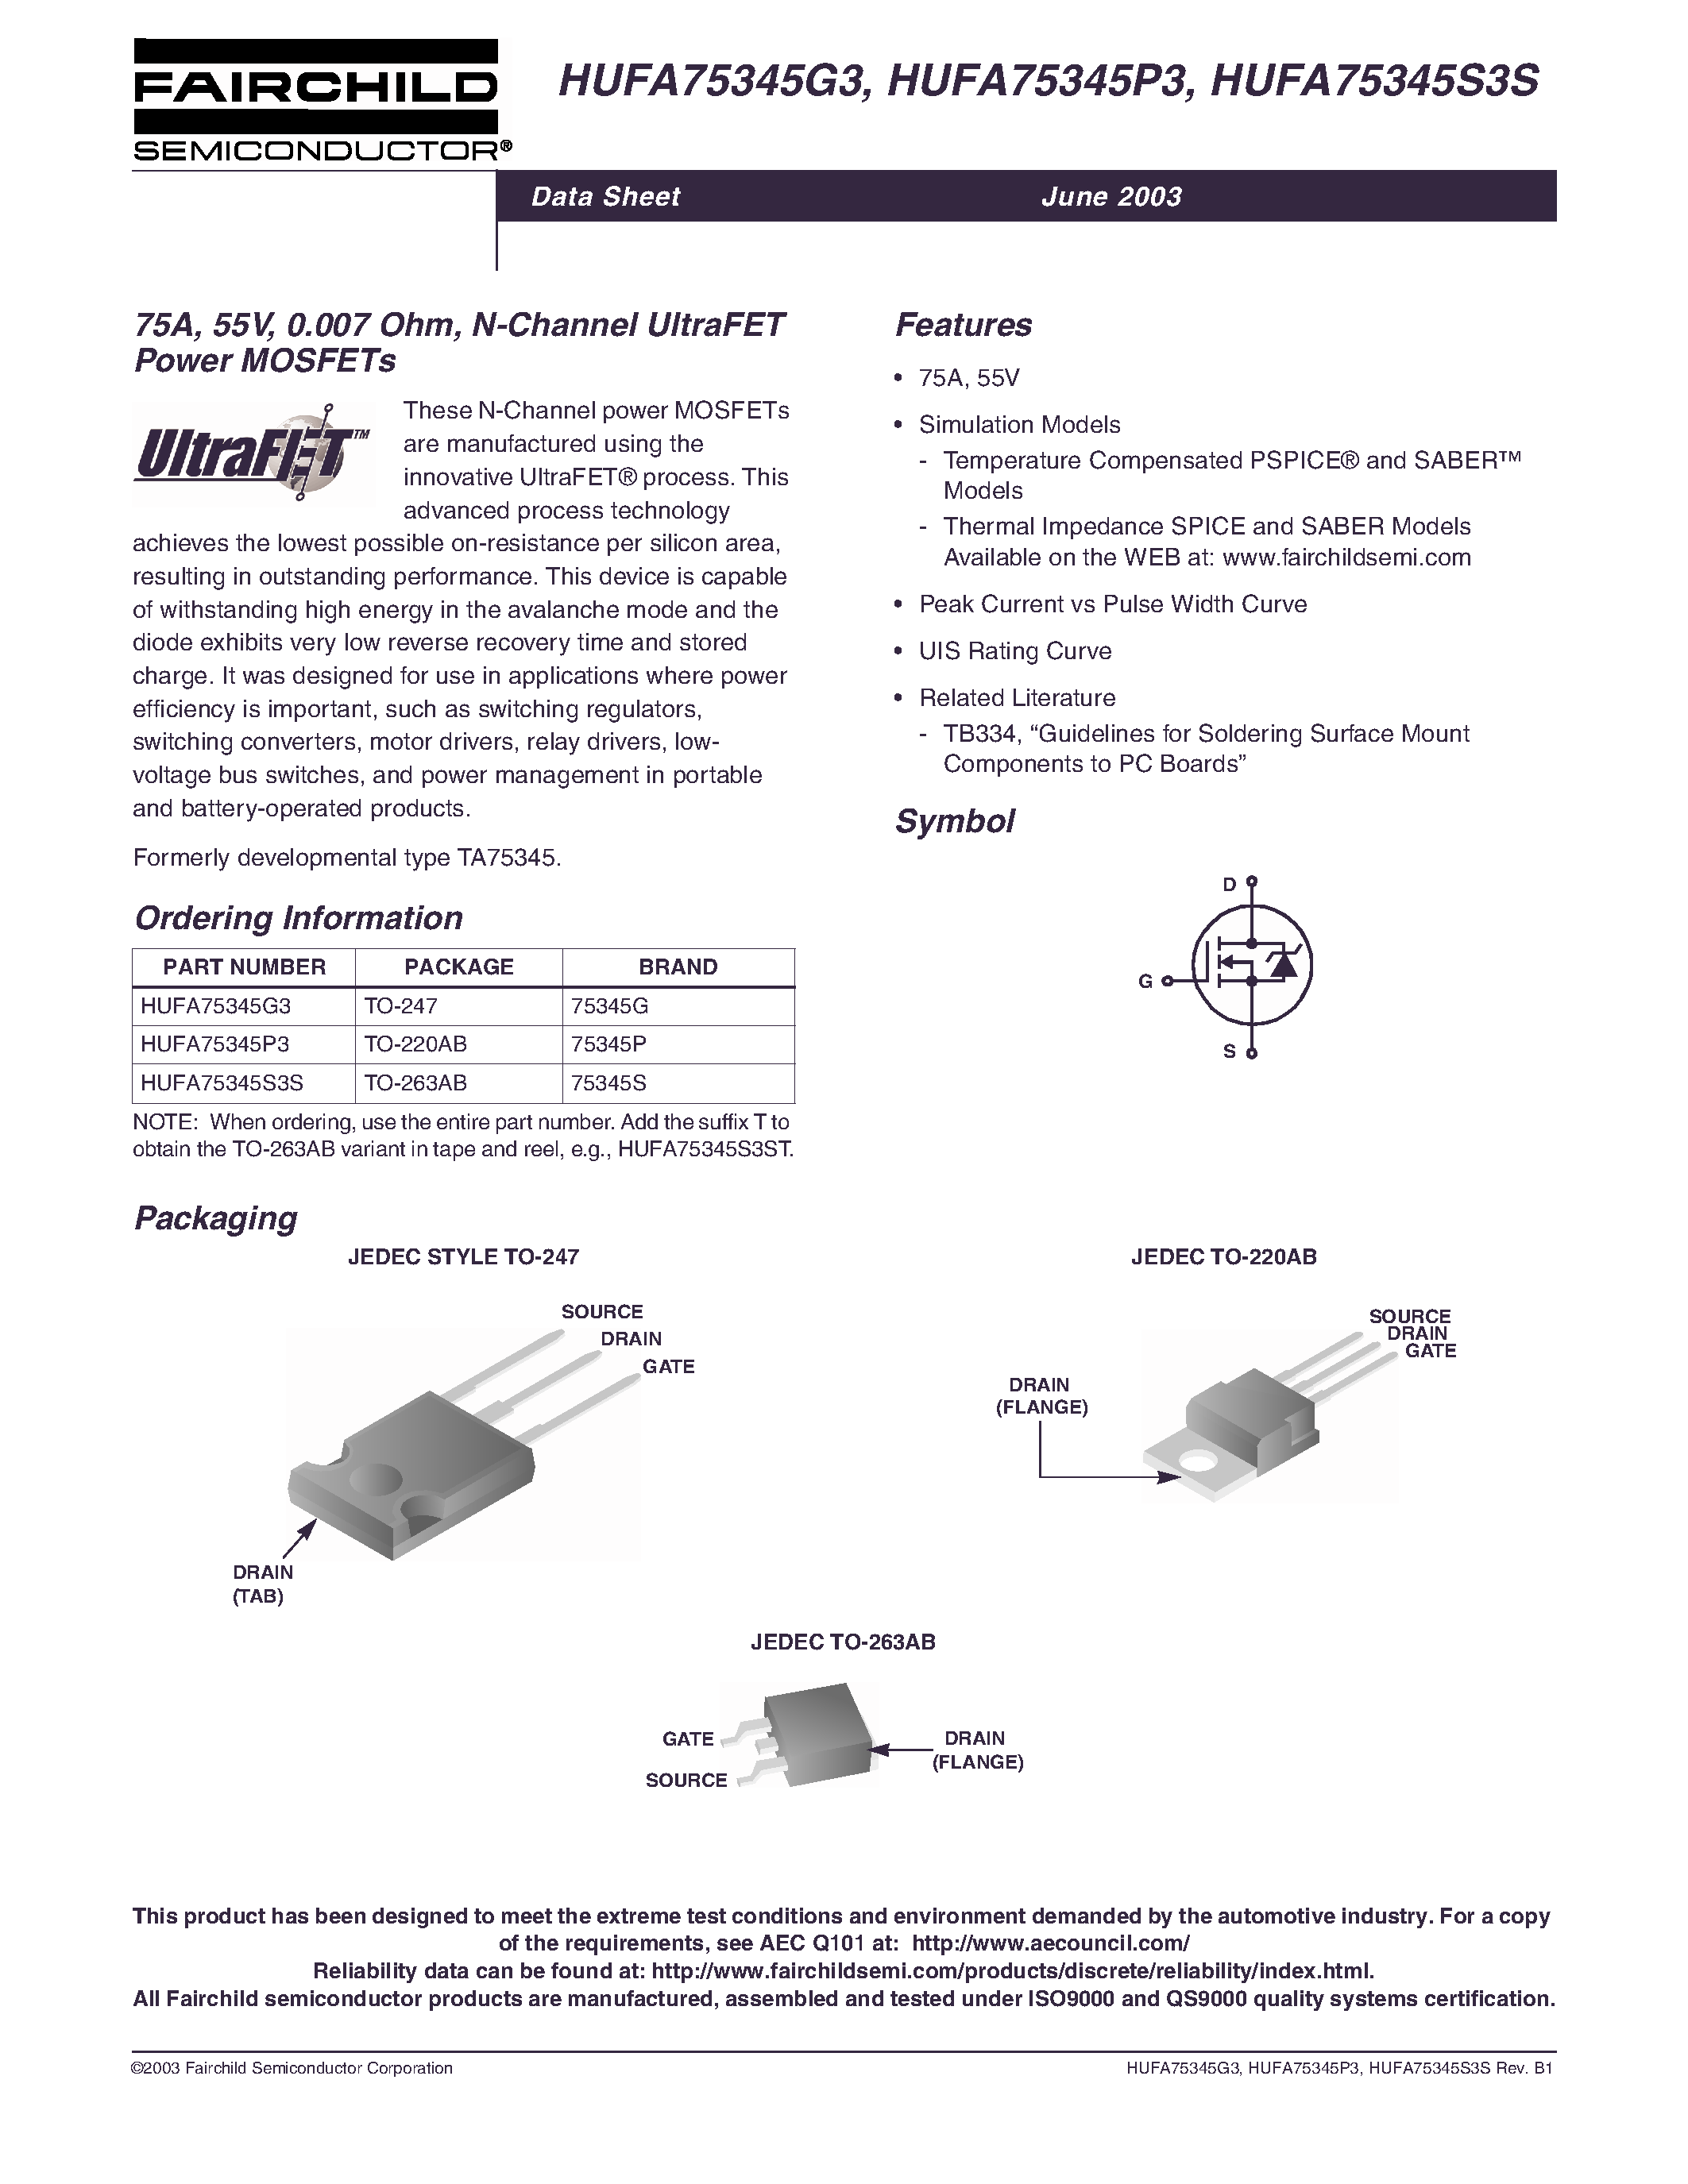 Даташит HUFA75345G3 - 75A/ 55V/ 0.007 Ohm/ N-Channel UltraFET Power MOSFETs страница 1